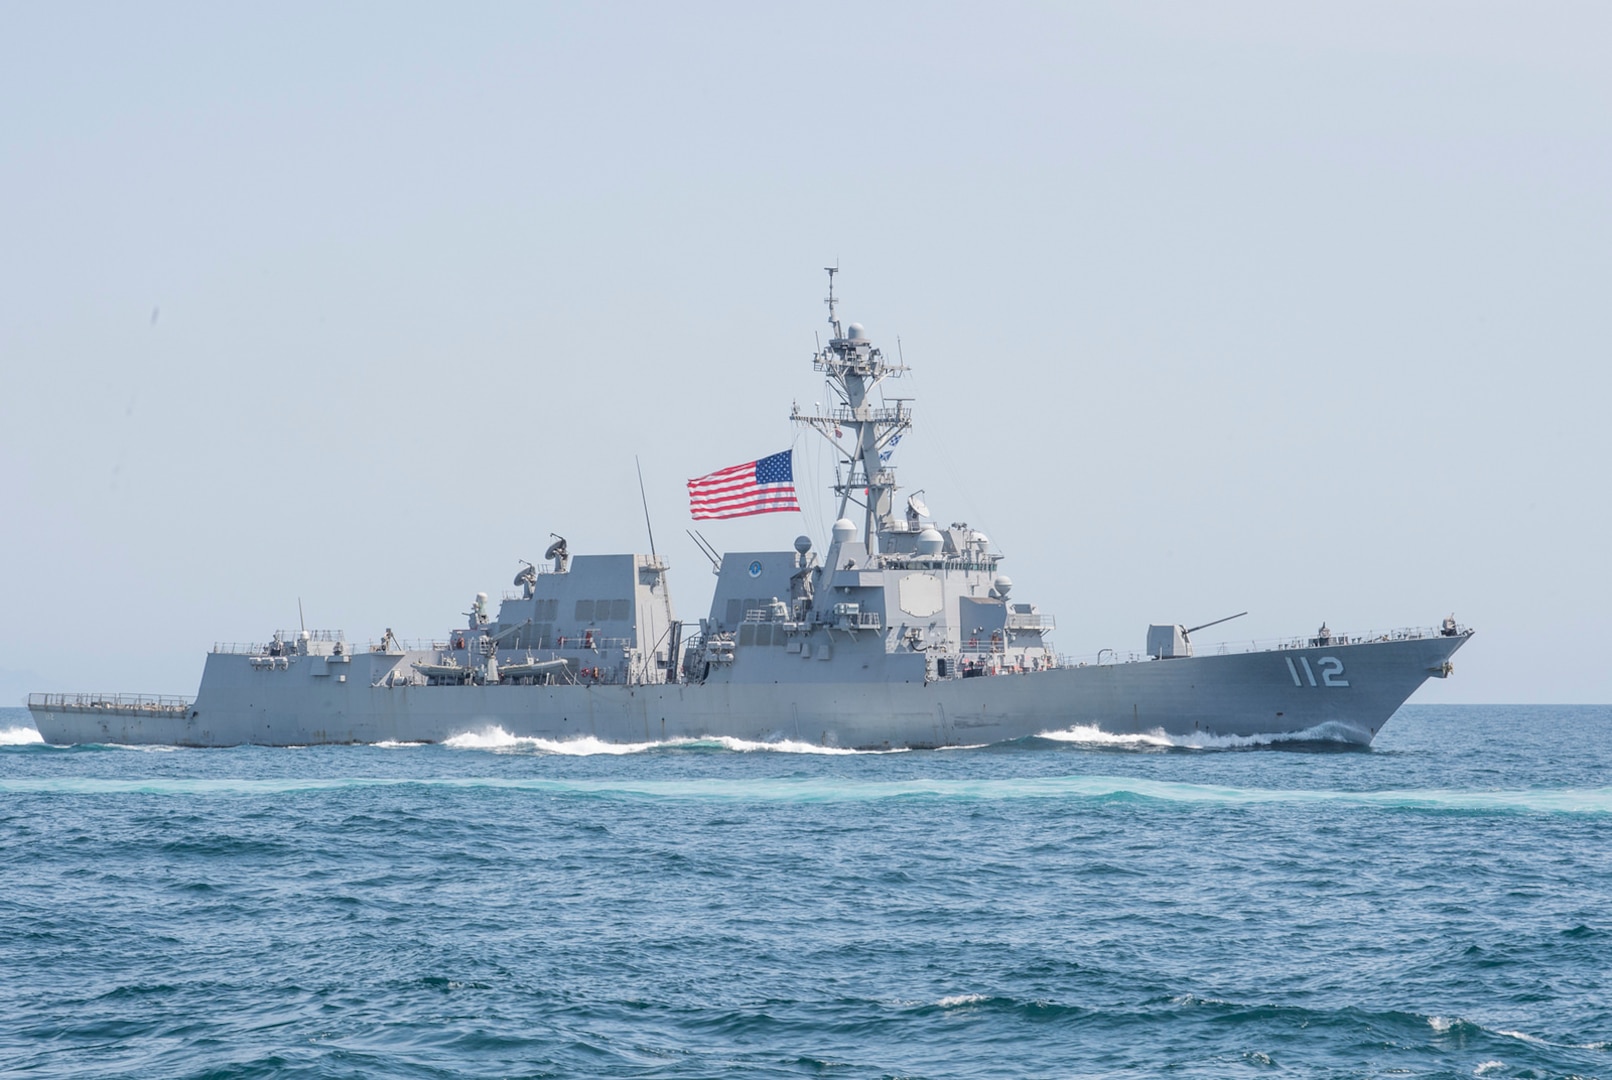 Arleigh Burke-class guided-missile destroyer USS Michael Murphy (DDG 112) operates in the Western Pacific, May 3, 2017. The U.S. Navy has patrolled the Indo-Asia-Pacific routinely for more than 70 years promoting regional peace and security. 